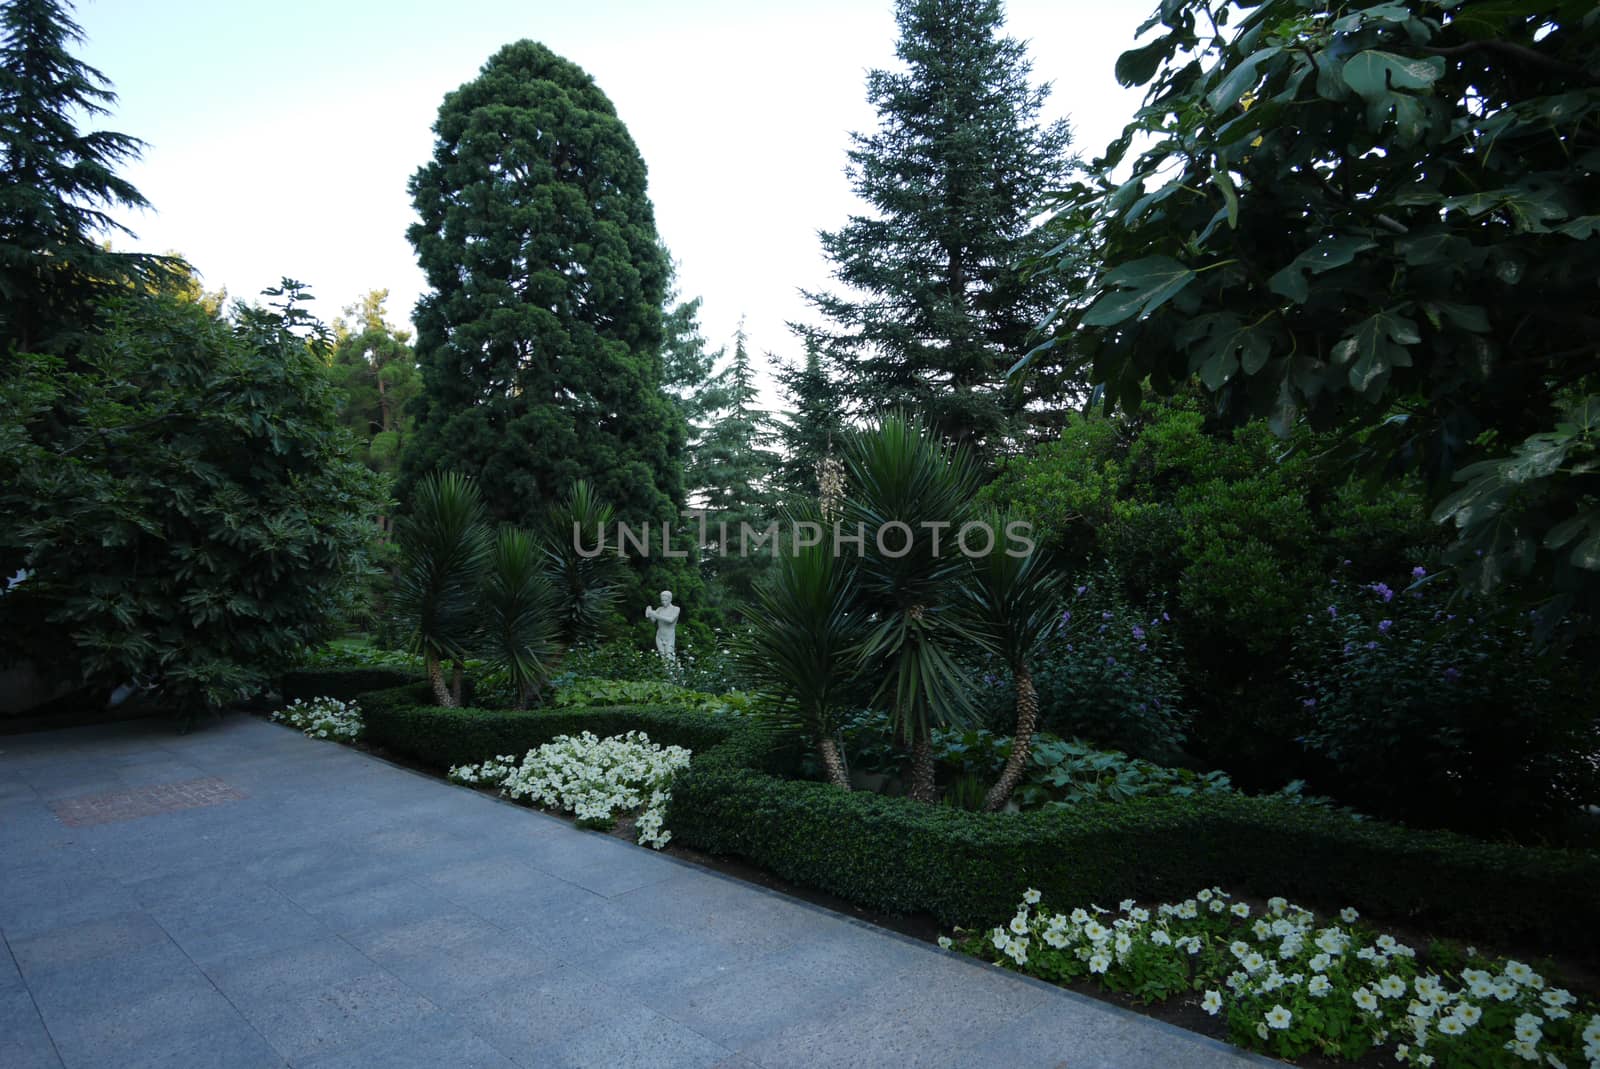 Garden with trees, palm trees, flowers and bushes in which stands a white statue of a man by Adamchuk